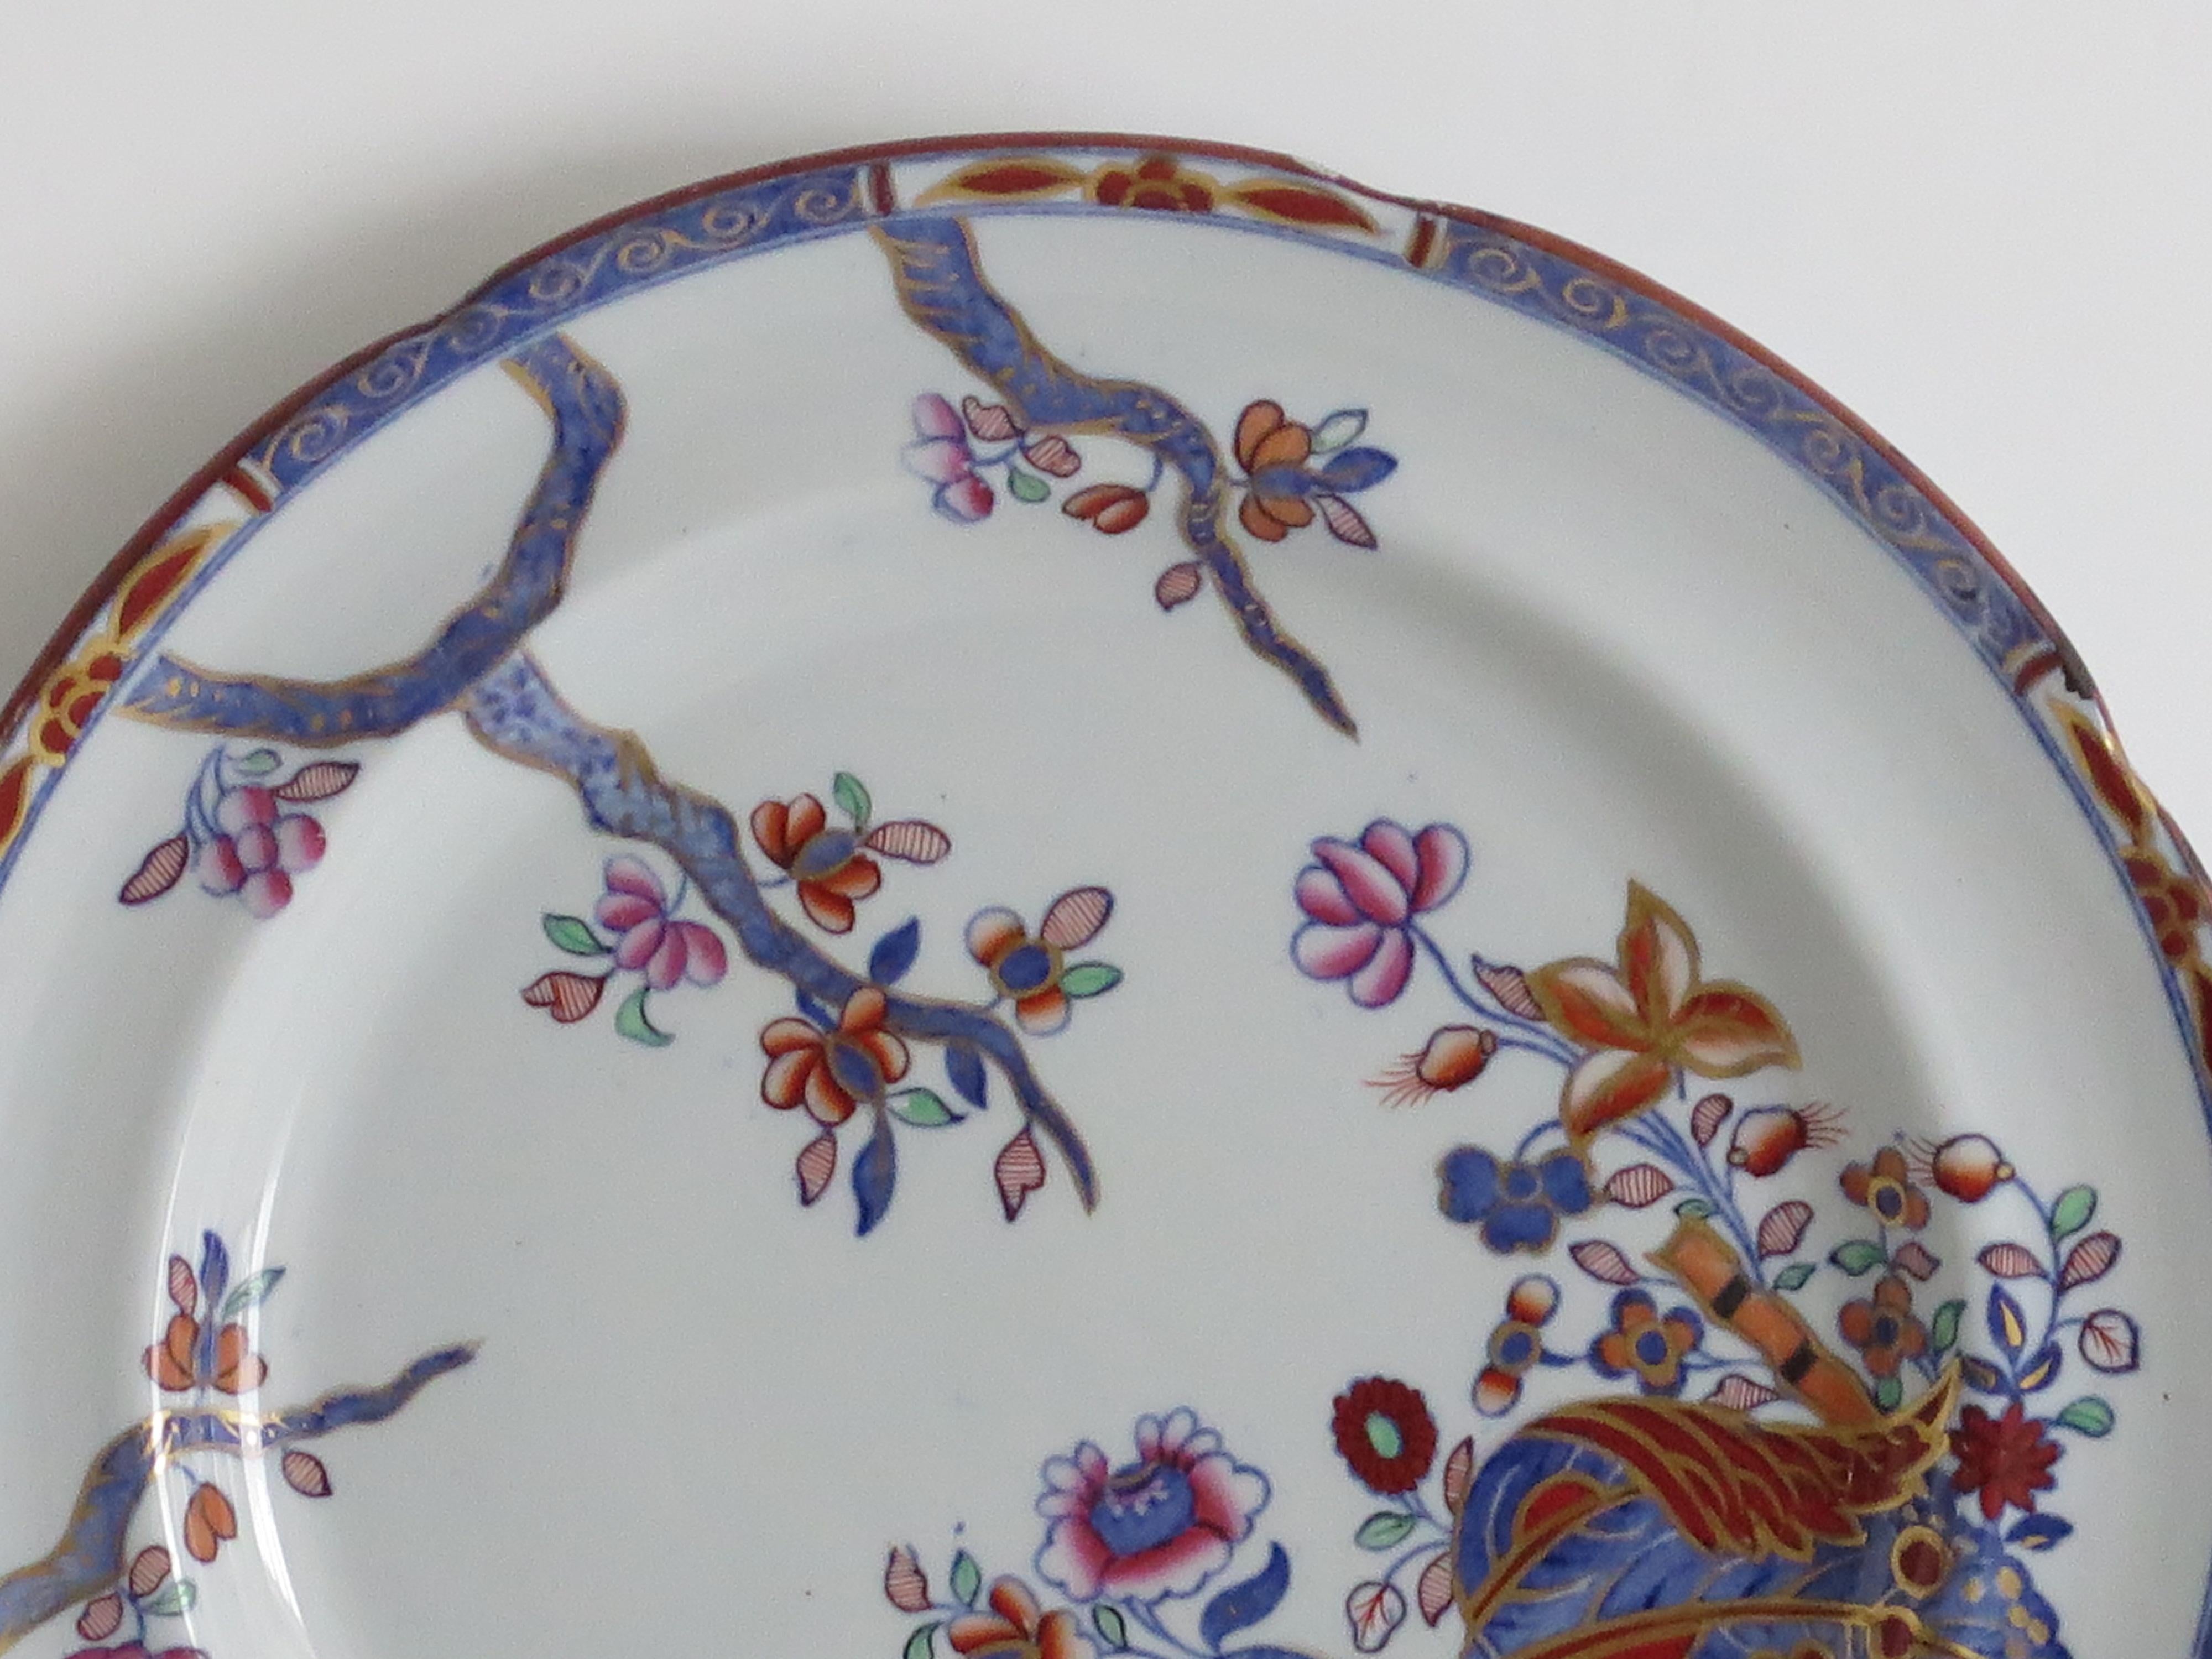 19th Century Copeland Spode Stone China Dinner Plate Tobacco Leaf Pattern No. 2061, Ca 1880